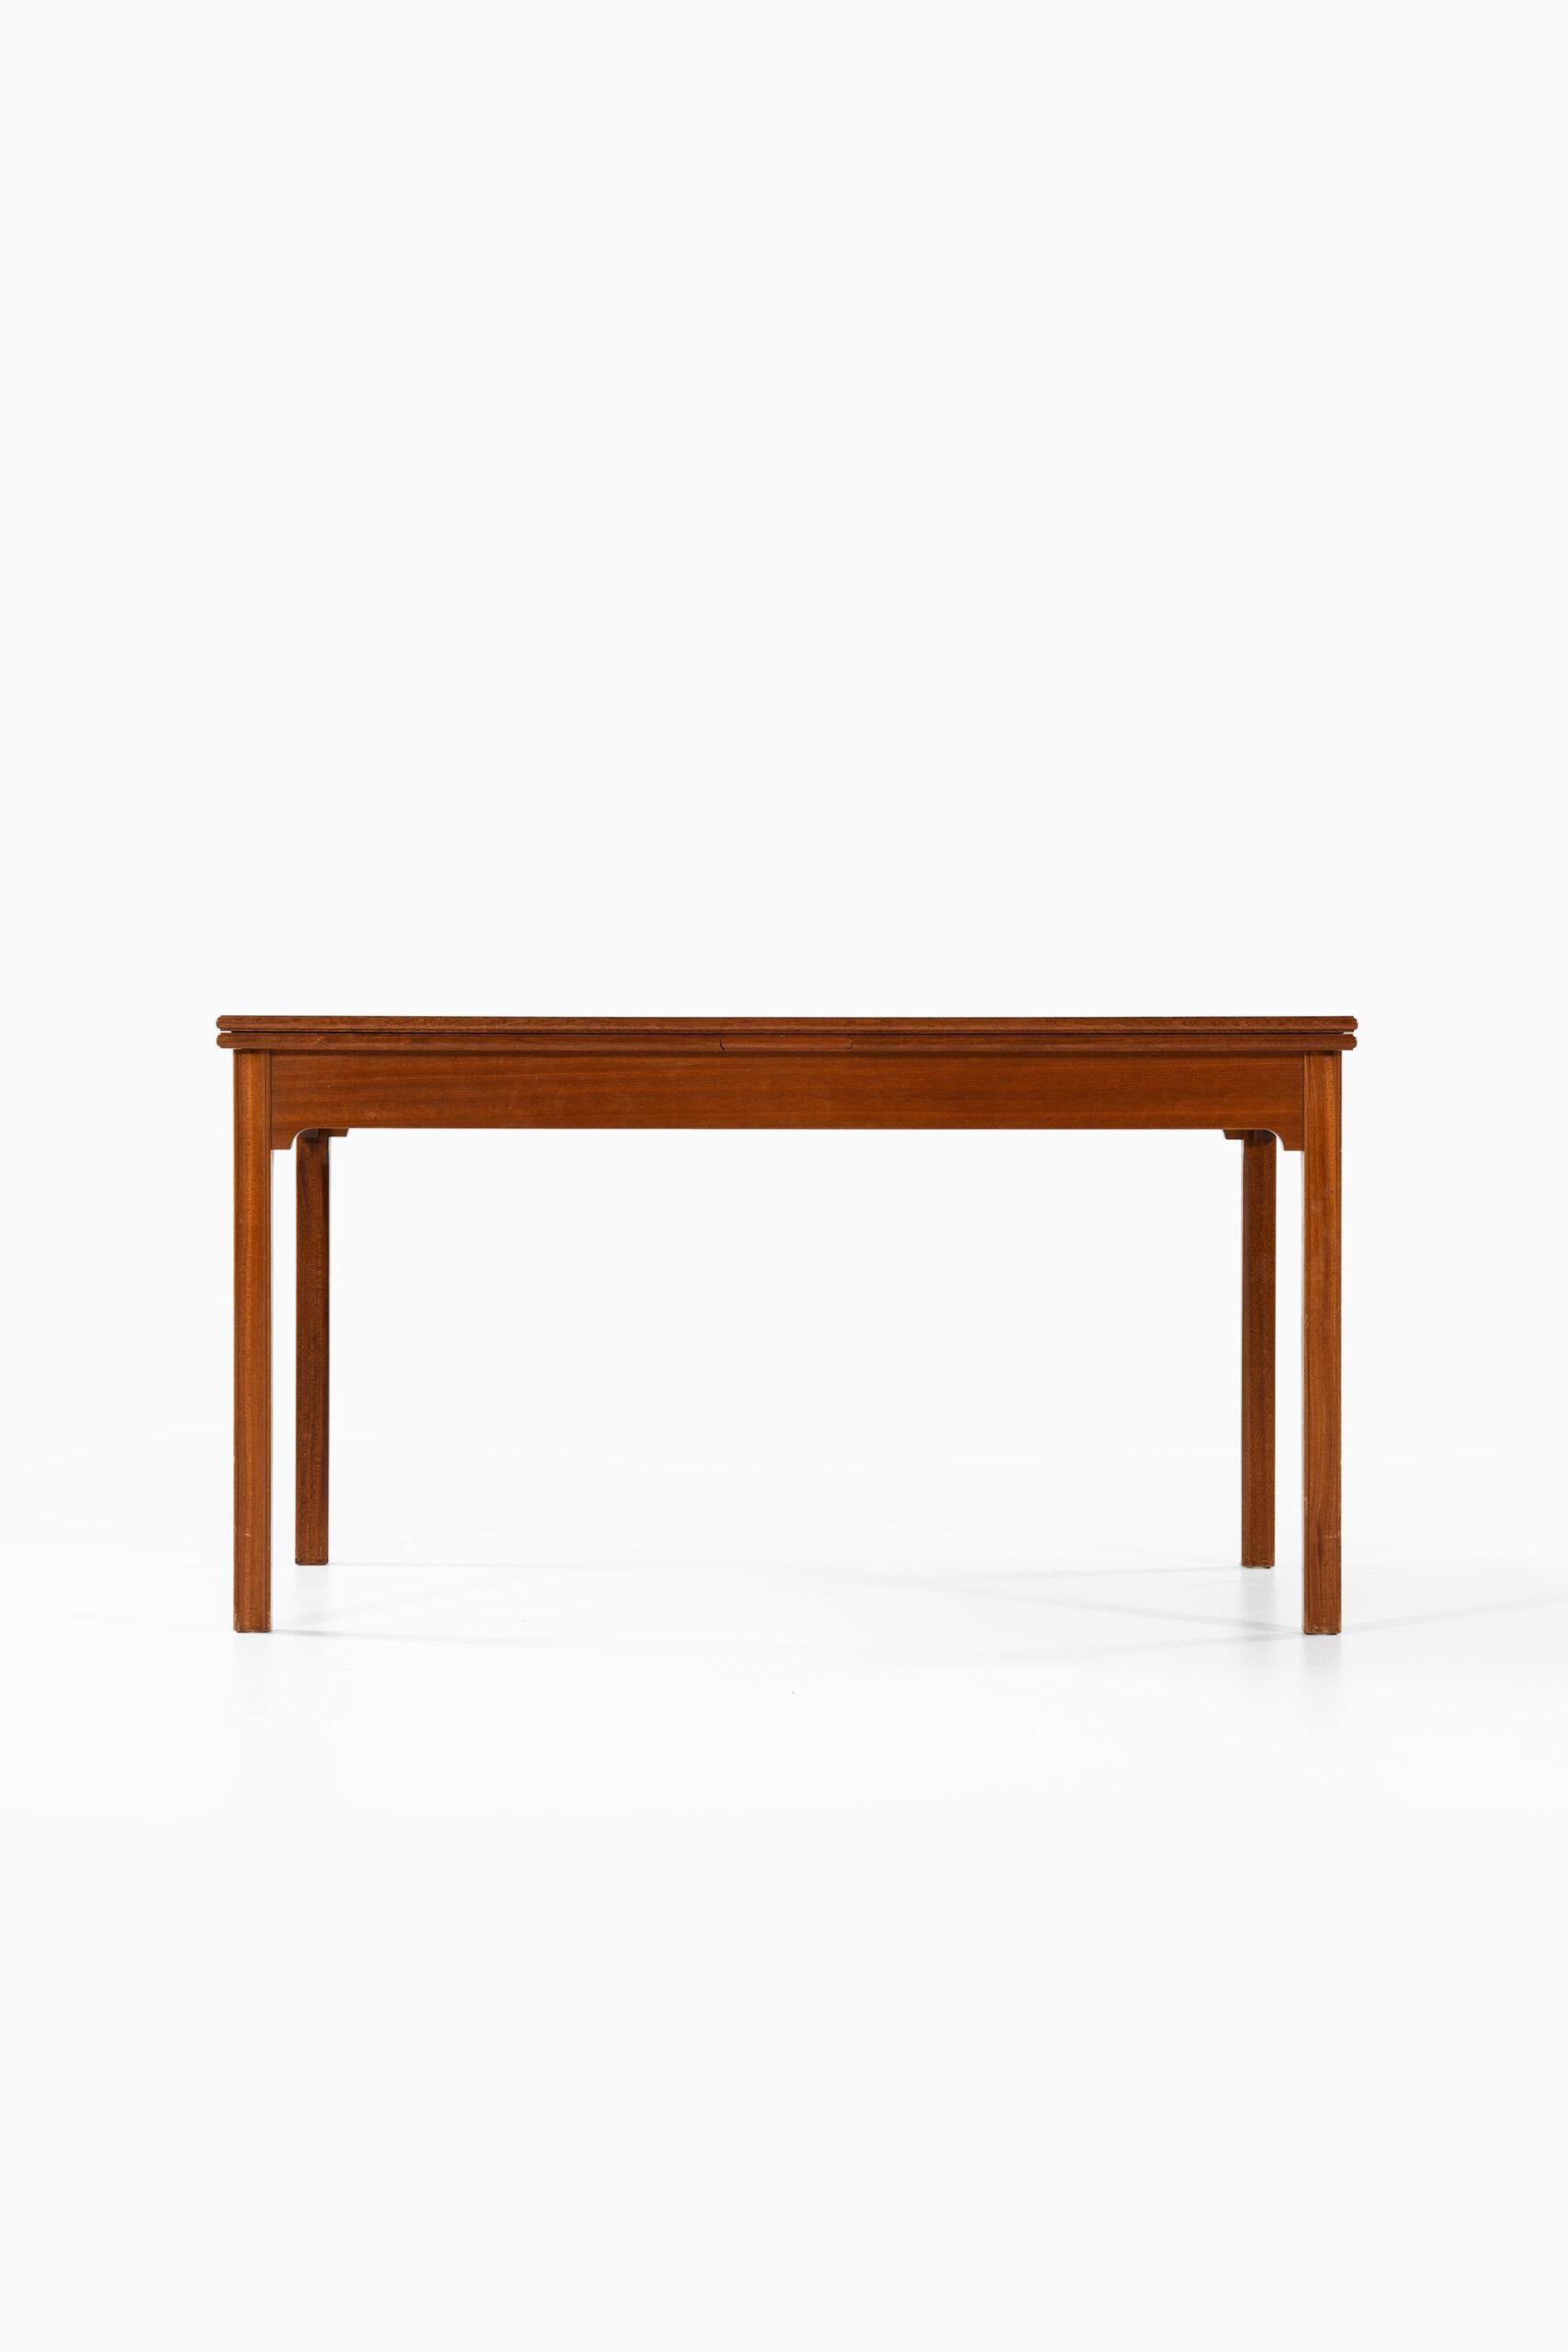 Rare dining table model 4229 designed by Kaare Klint. Produced by Rud. Rasmussen Snedkerier in Denmark. 

Dimensions (W x D x H): 138 ( 260 ) x 91.5 x 74.5 cm.